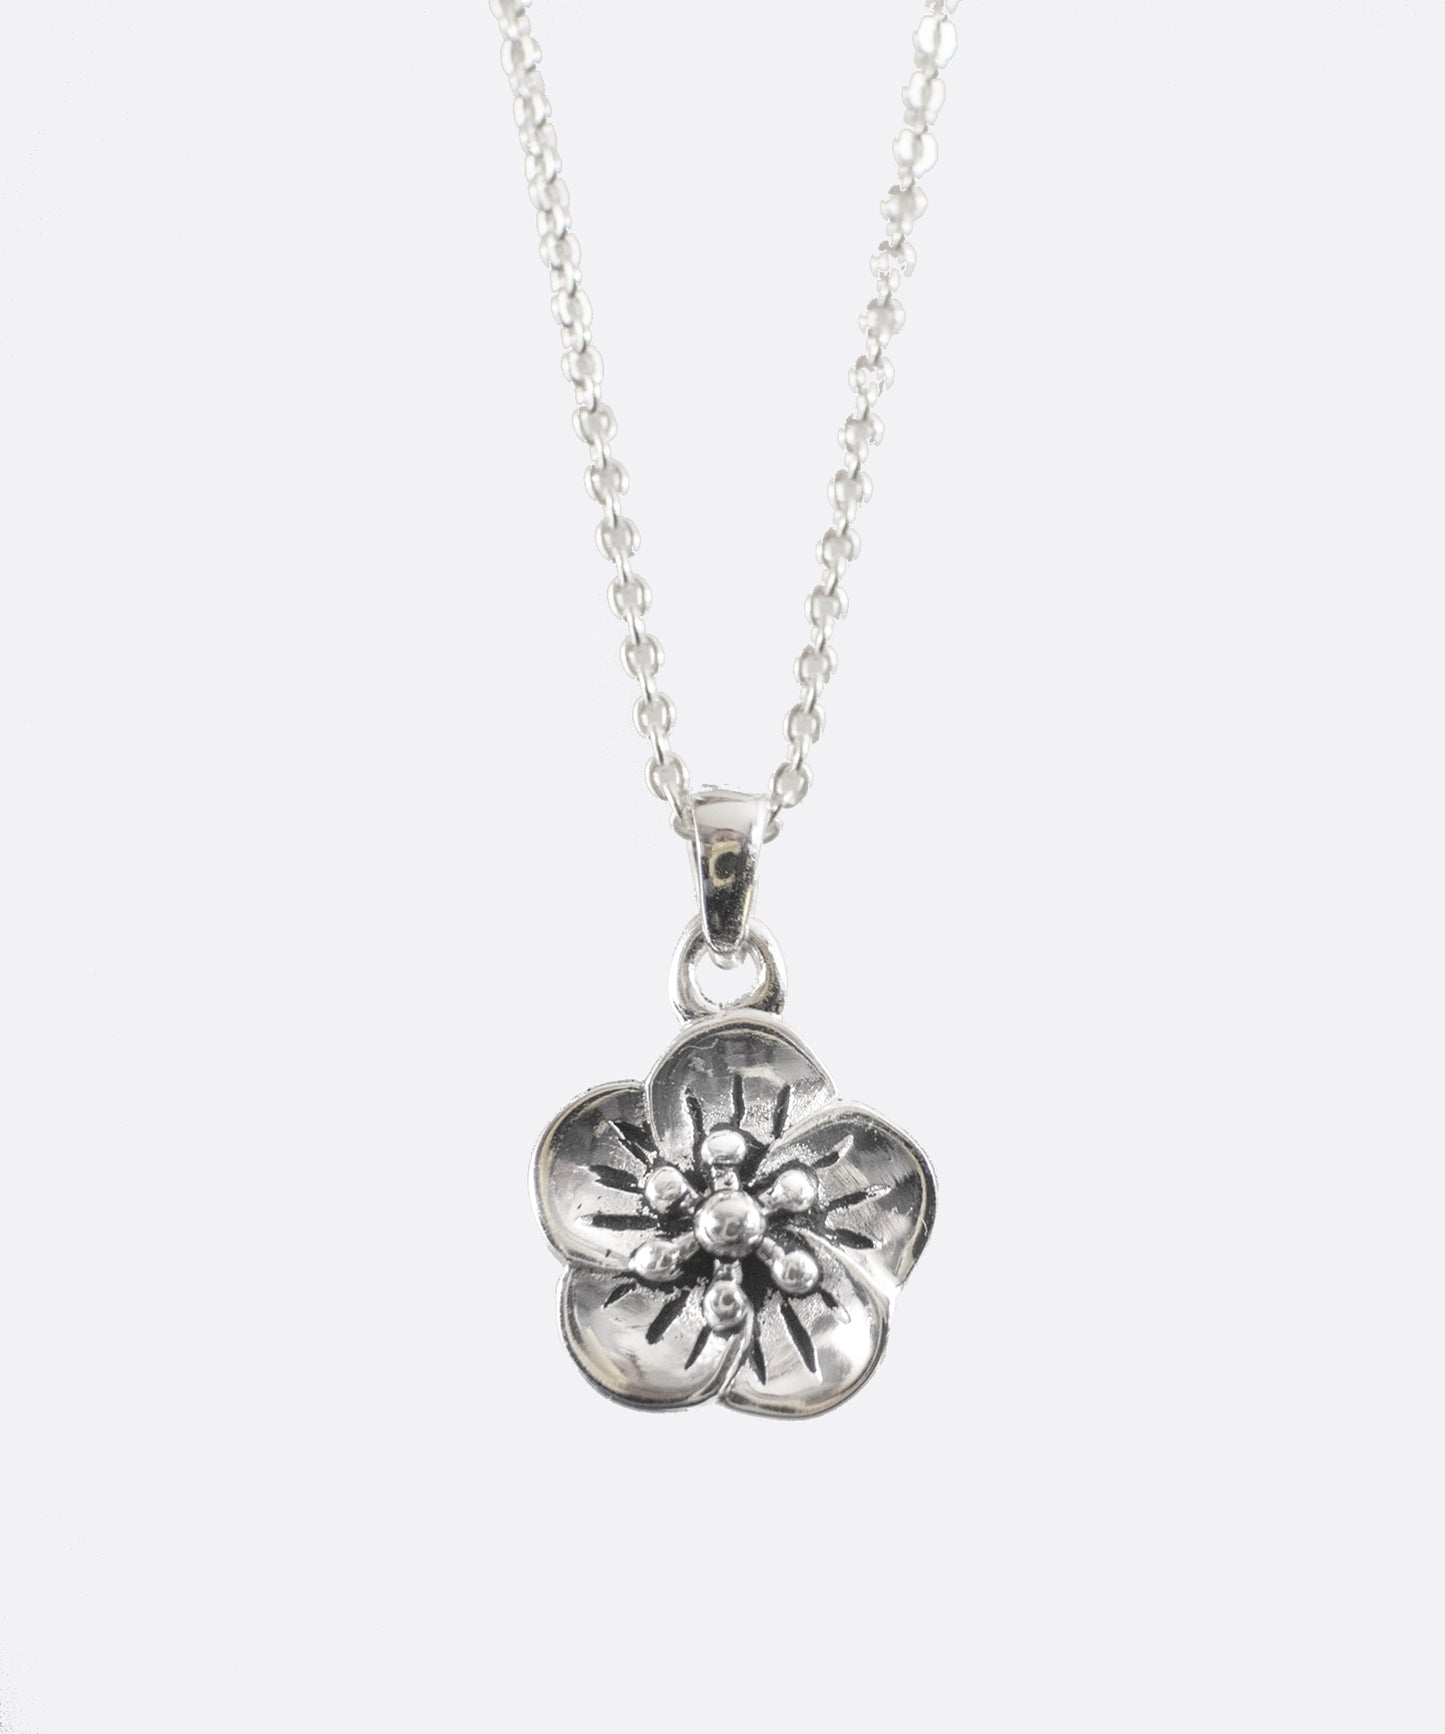 Cherry Blossom Flower Silver Necklace